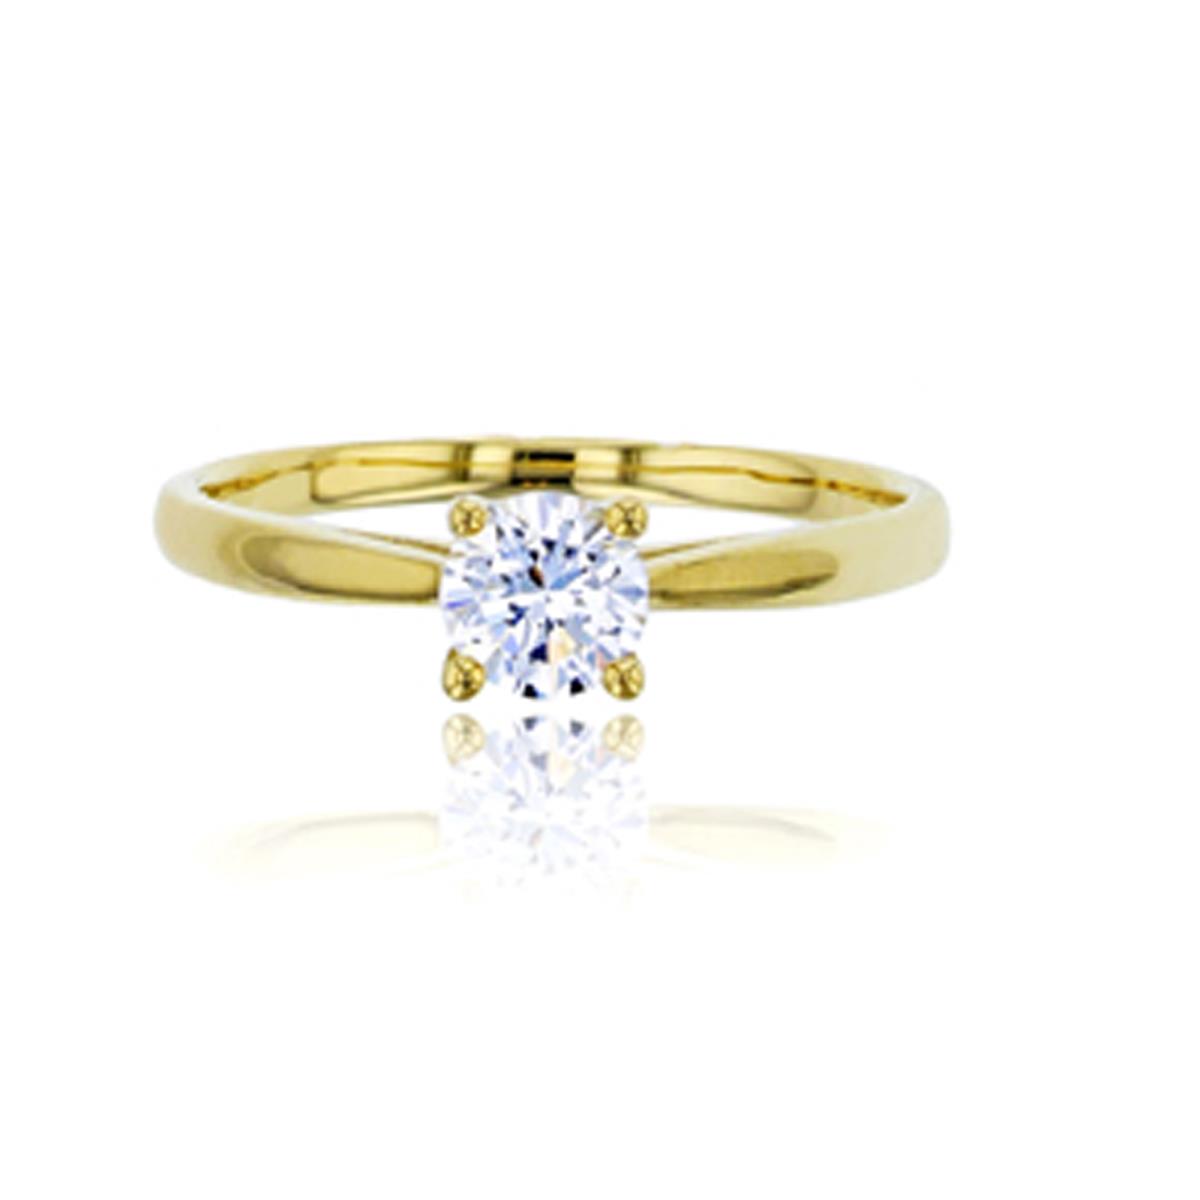 10K Yellow Gold 5mm Round Cut Polished Prong Set Engagement Ring